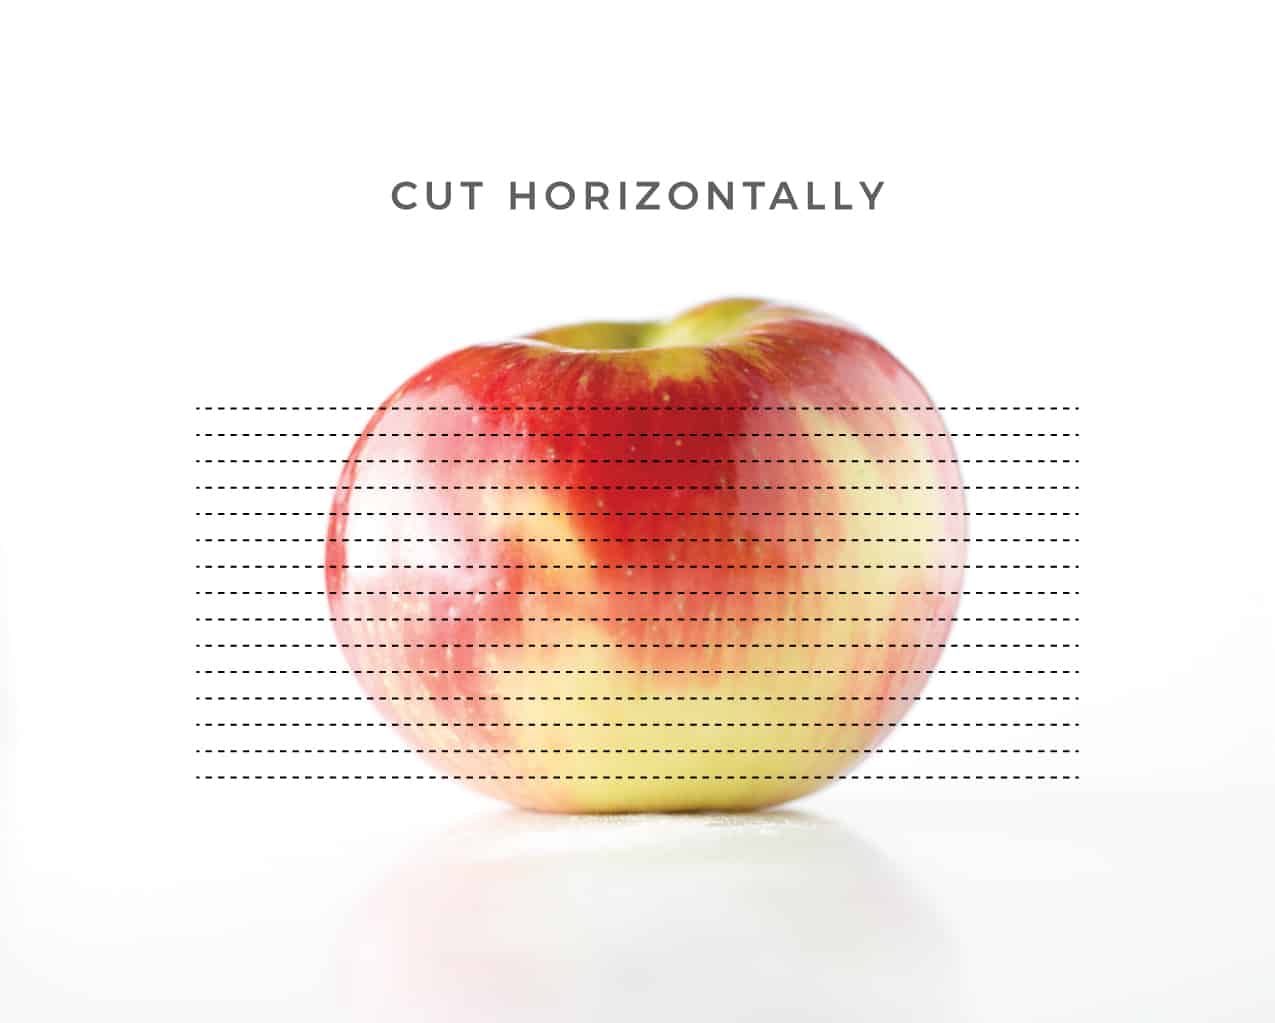 How to cut apples for apple chips